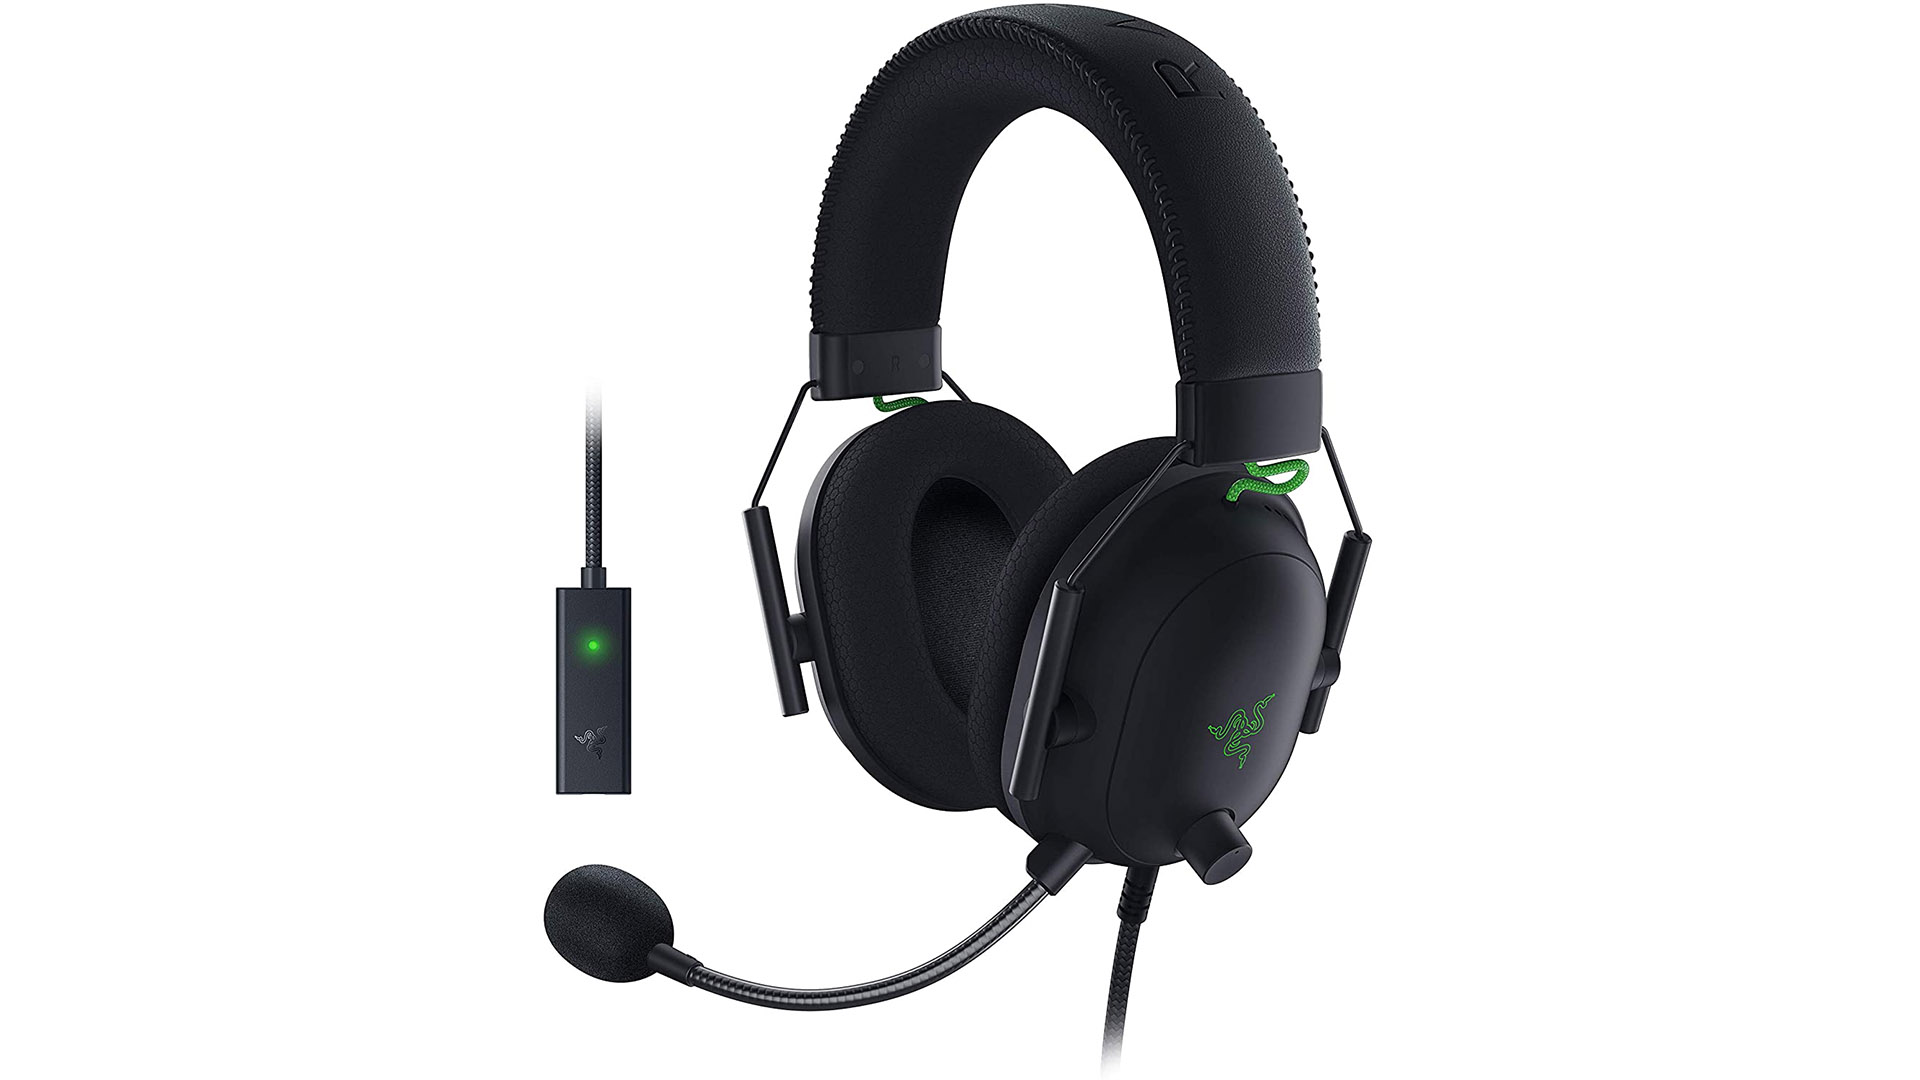 The best gaming headset is the Razer BlackShark V2, with a detachable microphone and memory foam headband